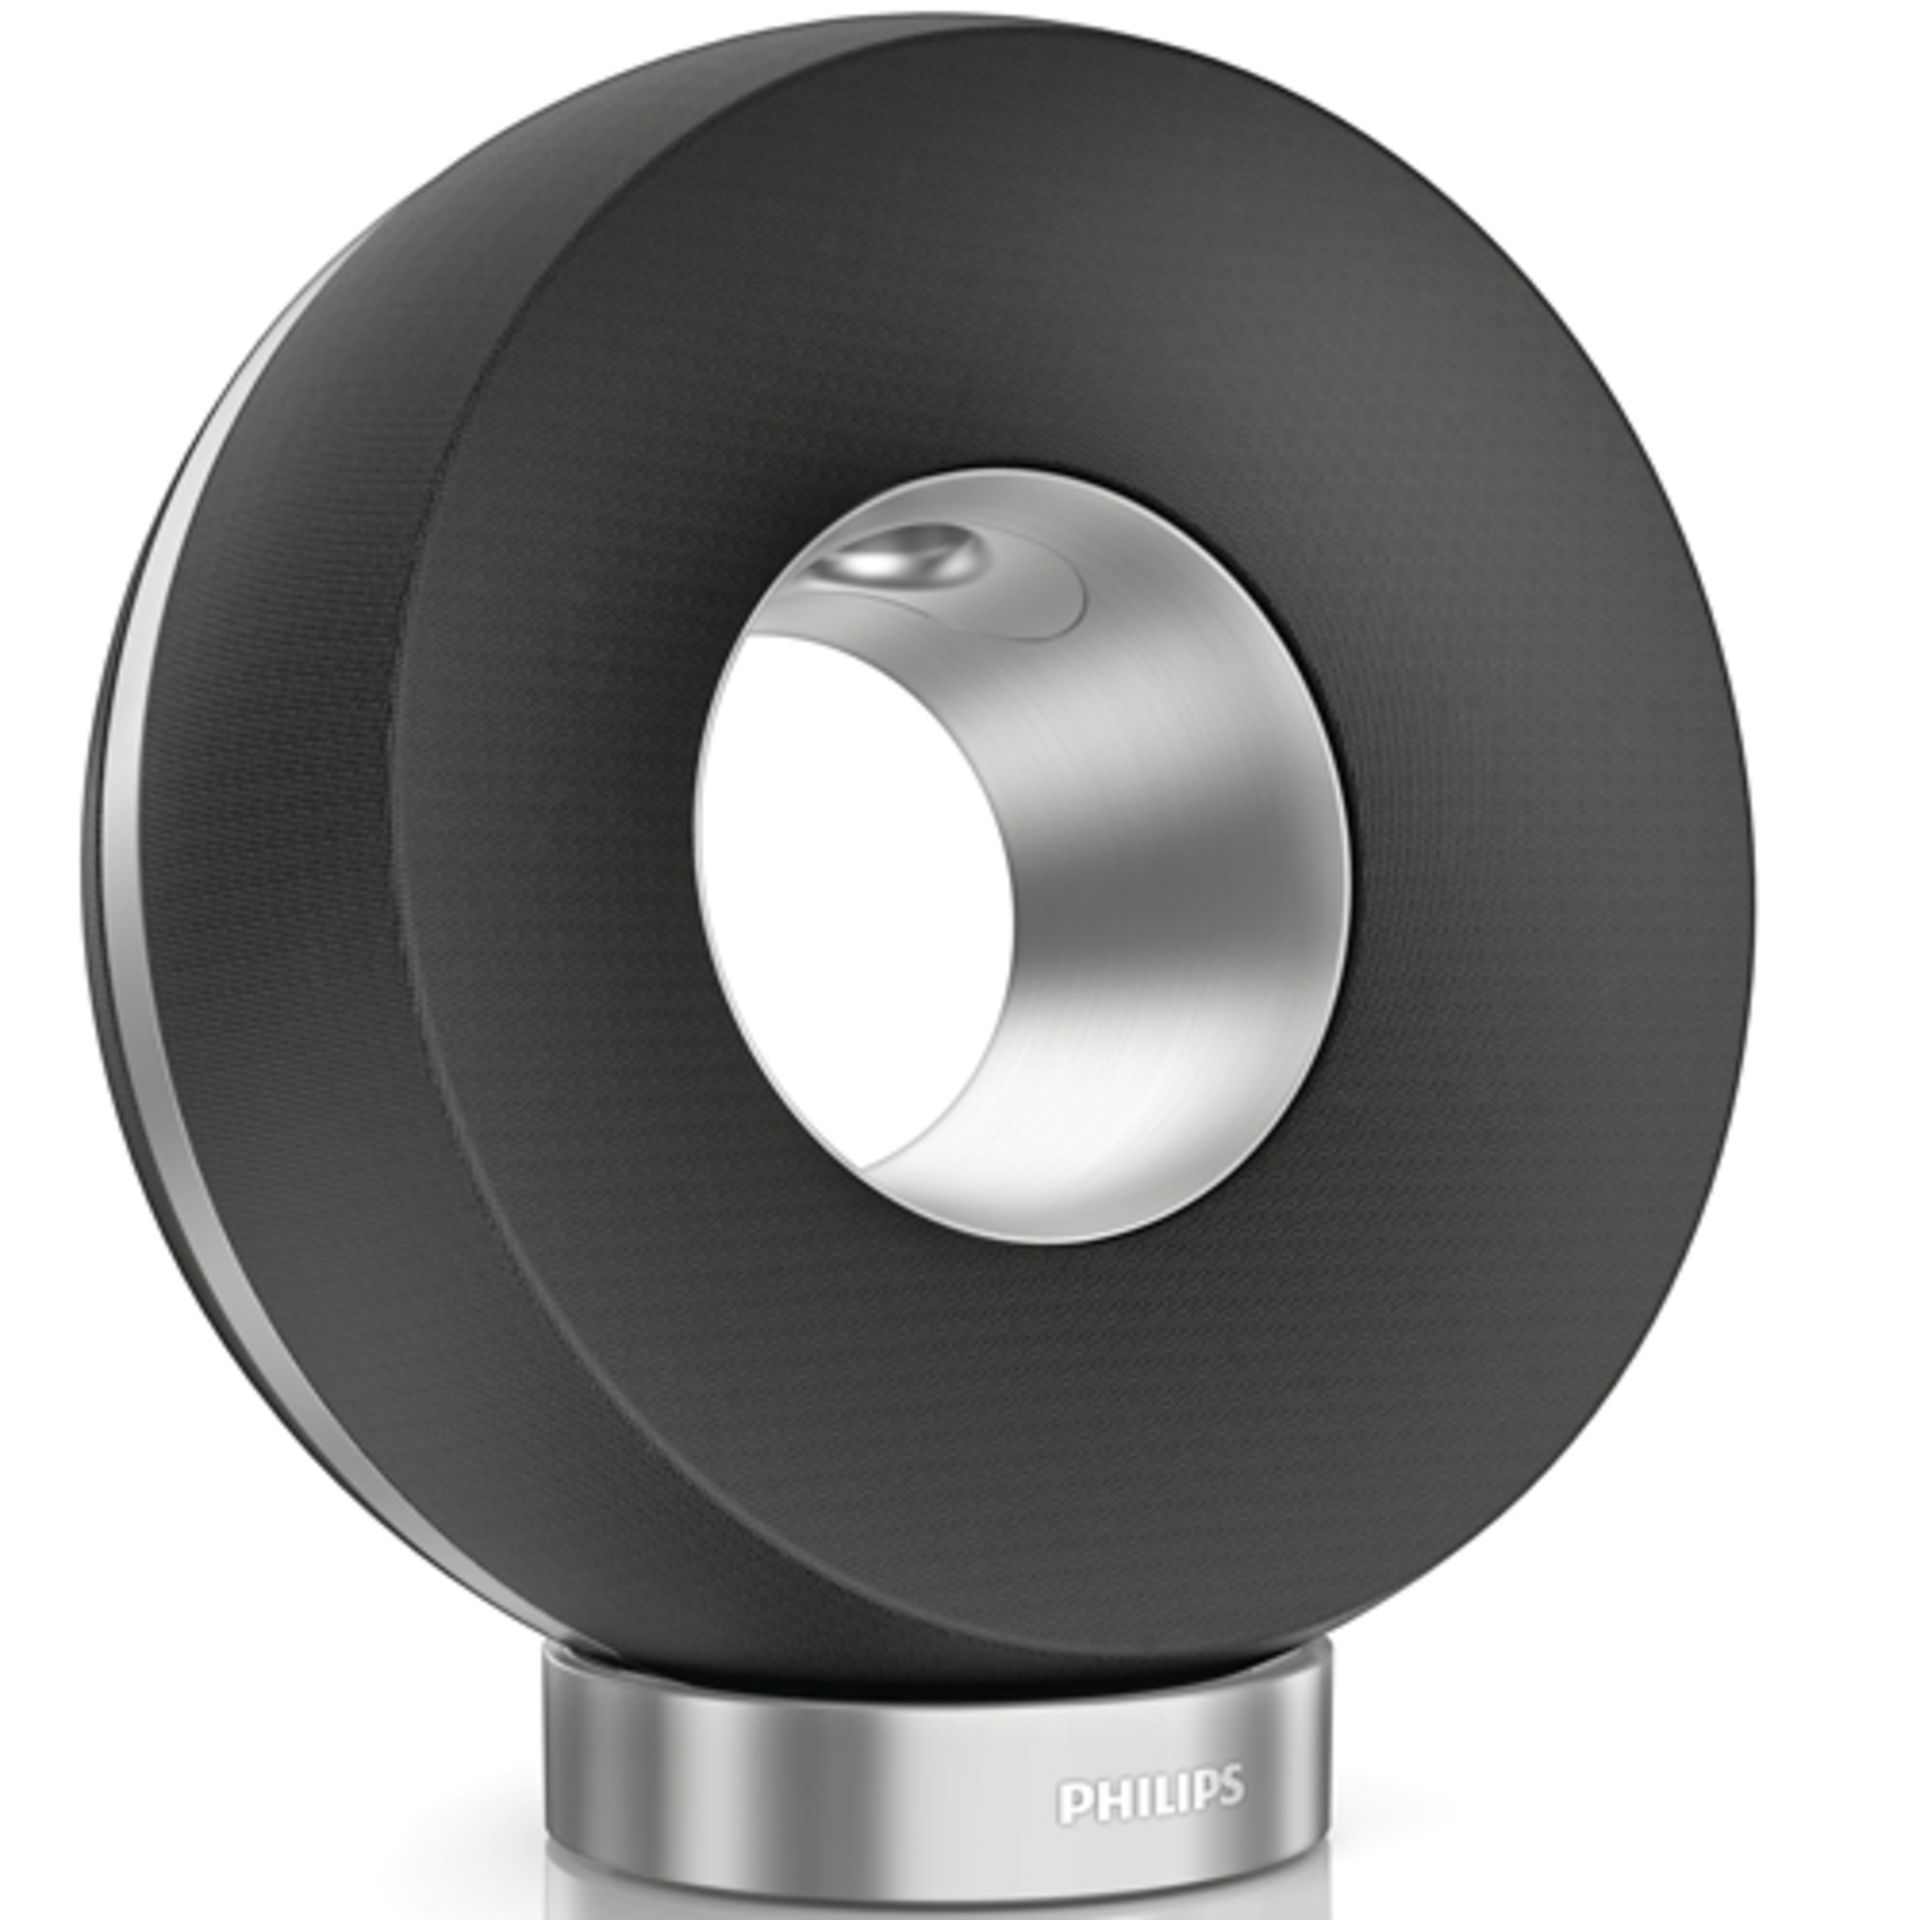 V Brand New Phillips DS3880/10 Fidelio Soundsphere with Airplay - Aux Input - USB For Charging and